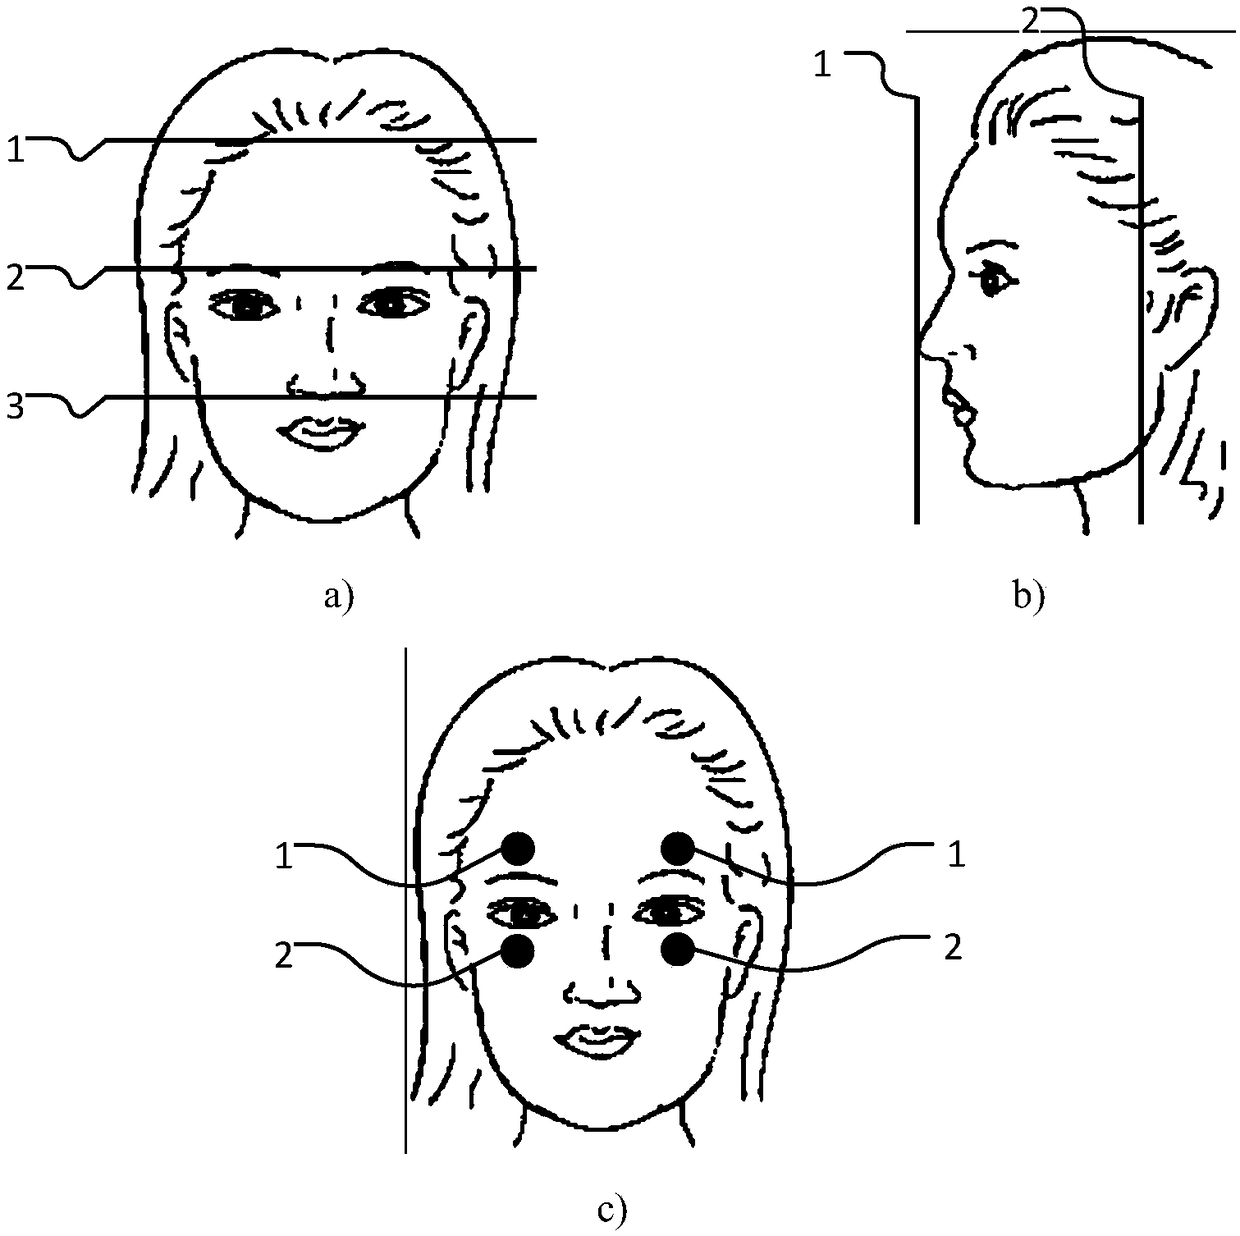 A speech cognition evaluation method based on eye movement